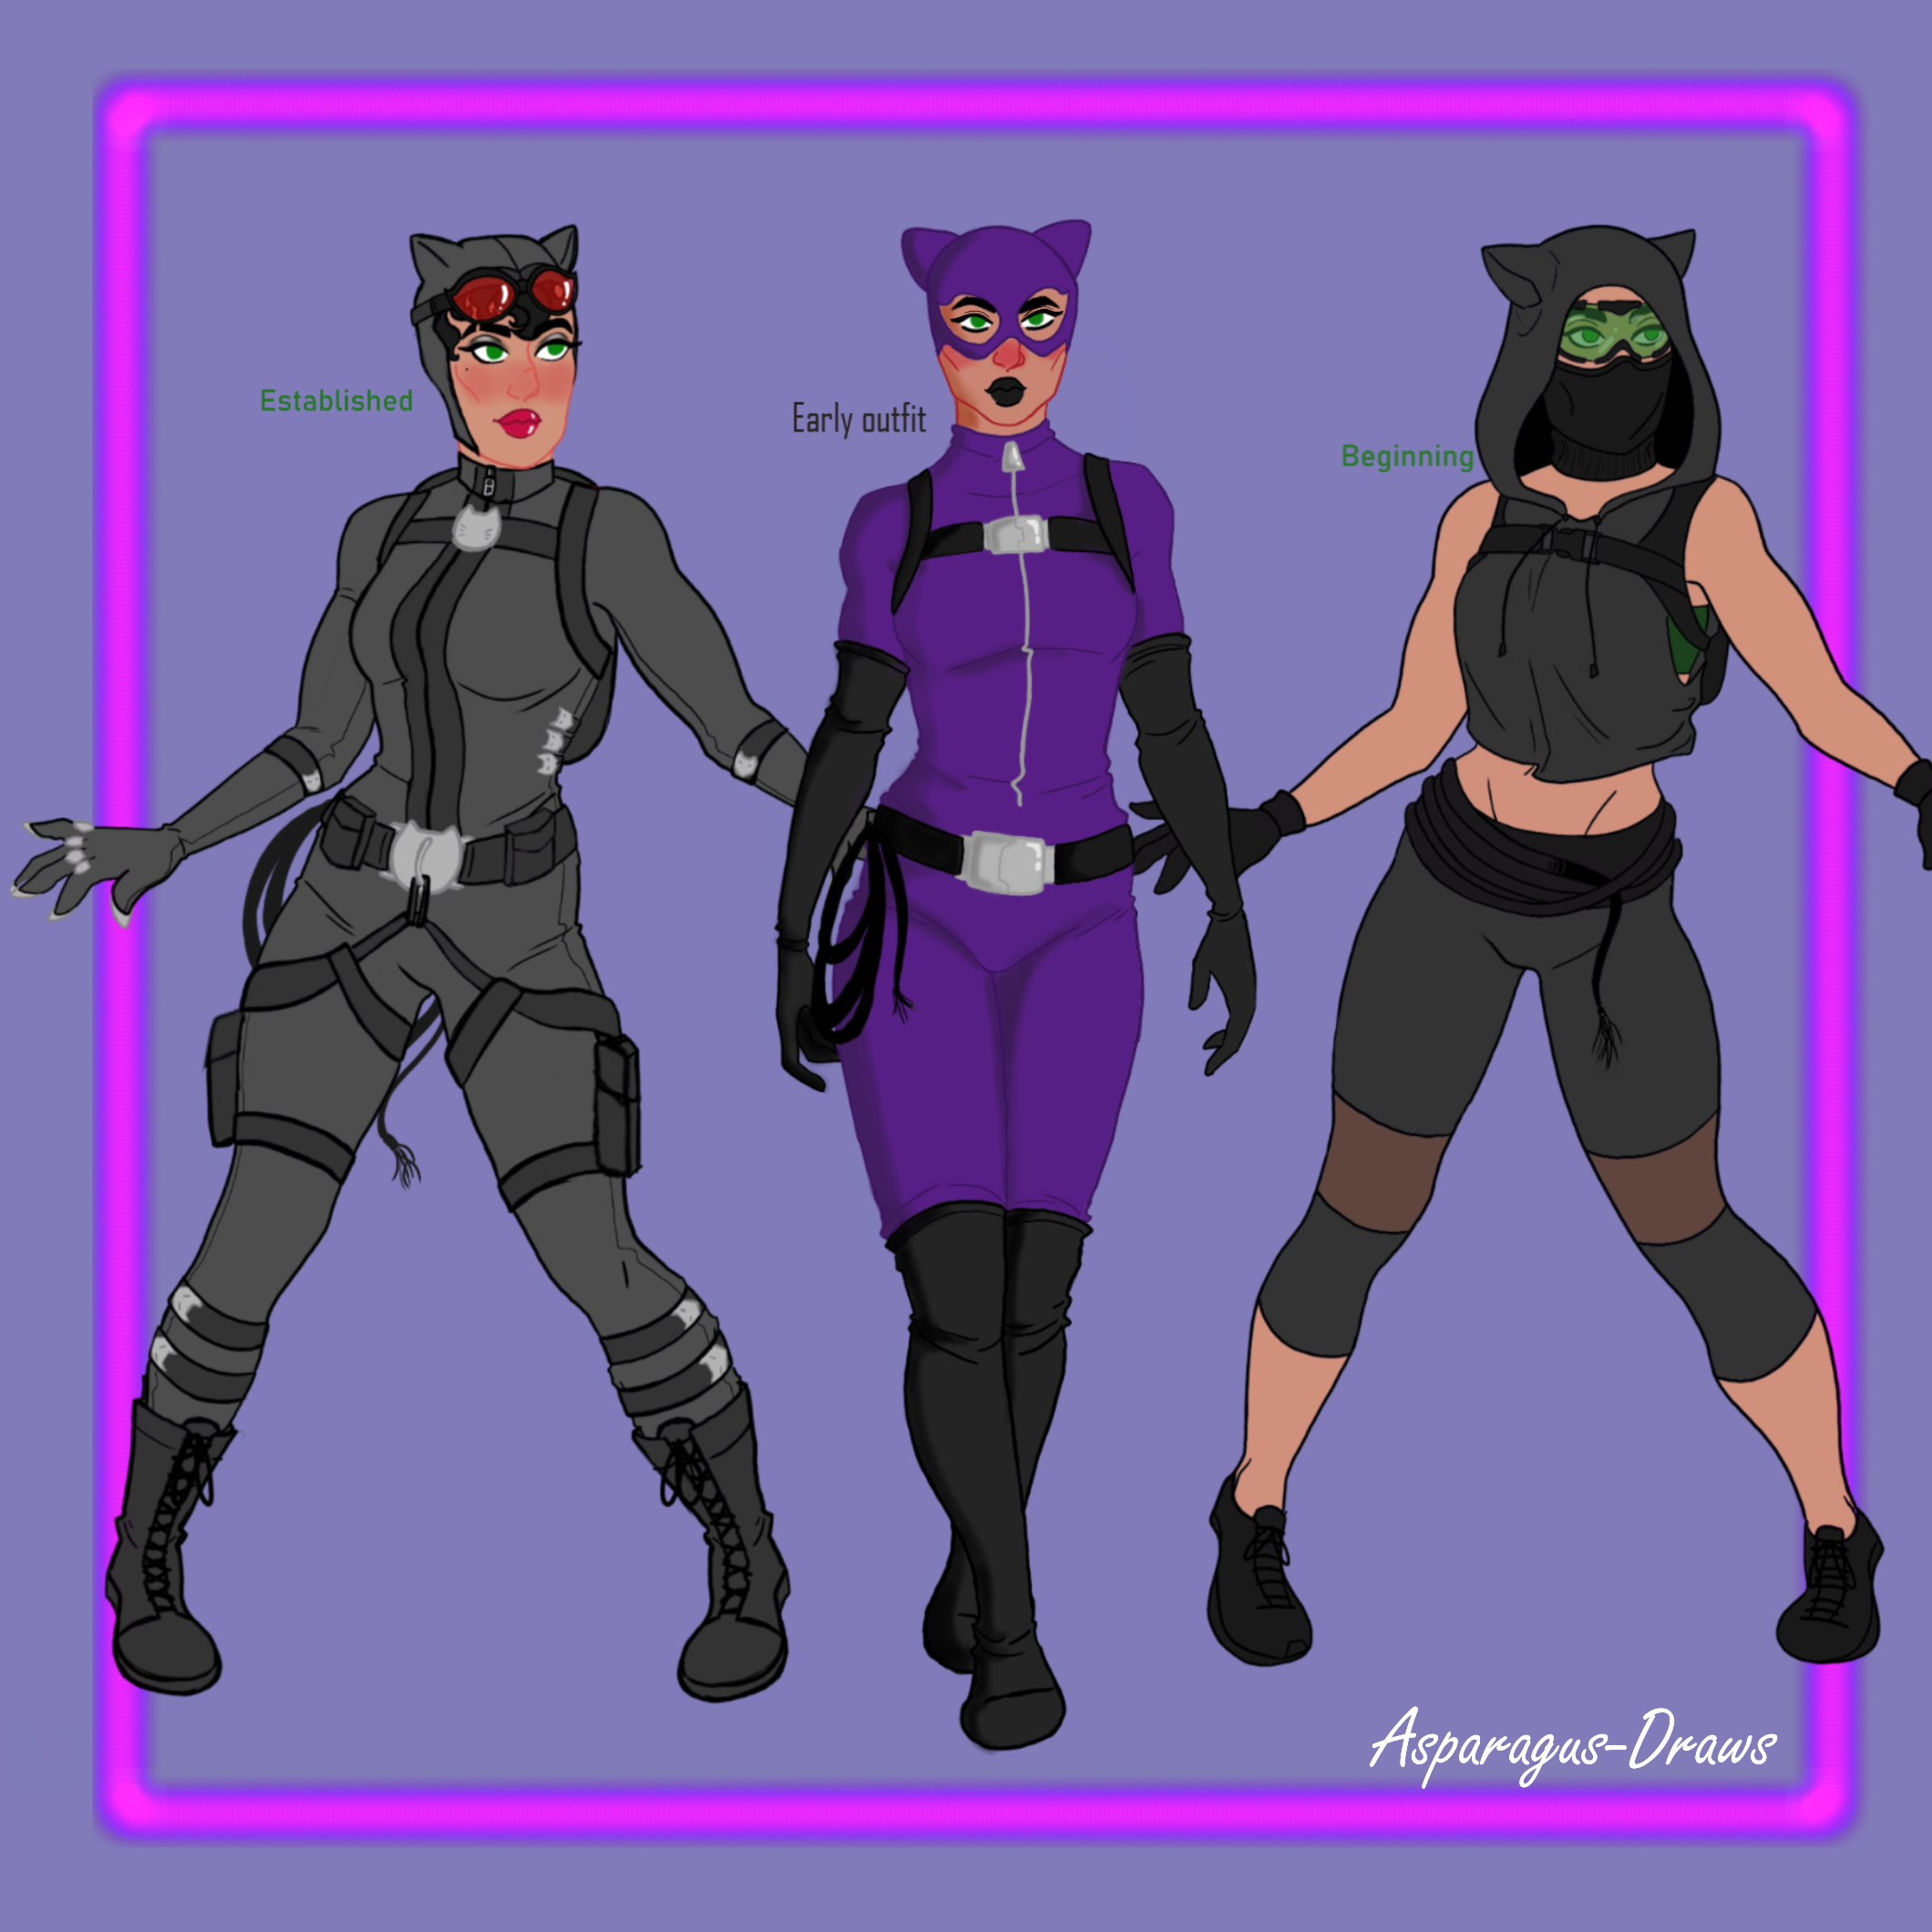 Selina's Outfits by Asparagus-Draws on DeviantArt